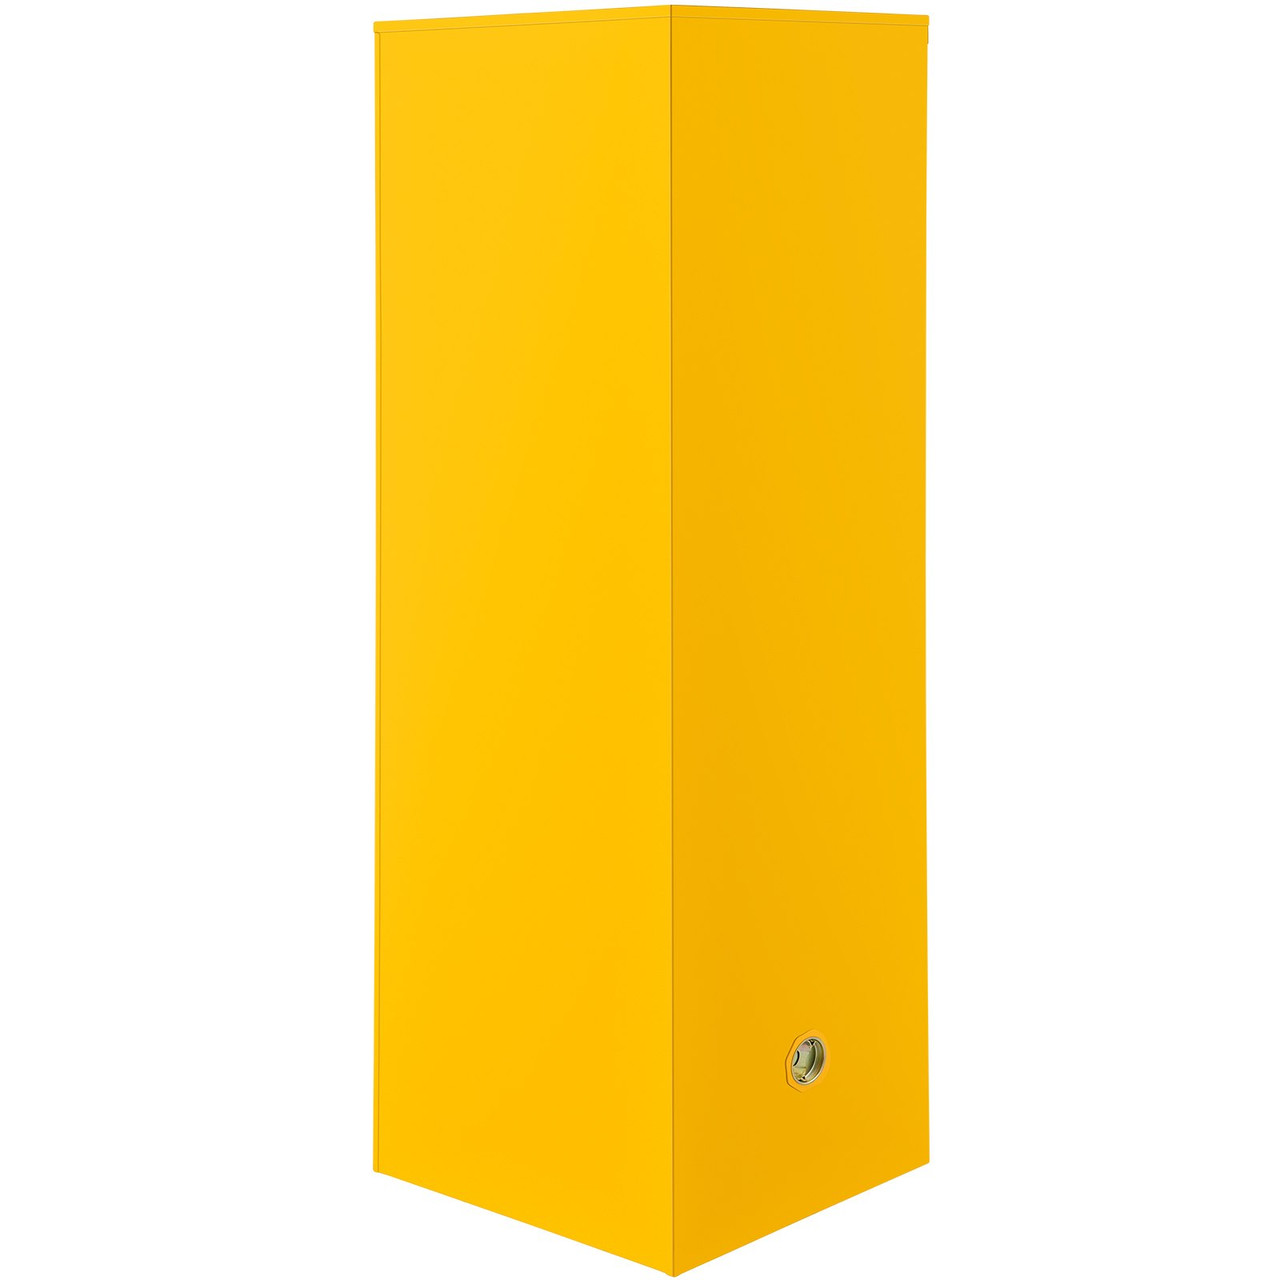 Flammable Cabinet 18" x 18" x 35", Galvanized Steel Safety Cabinet, Adjustable Shelf Flammable Storage Cabinet, for Commercial Industrial and Home Use